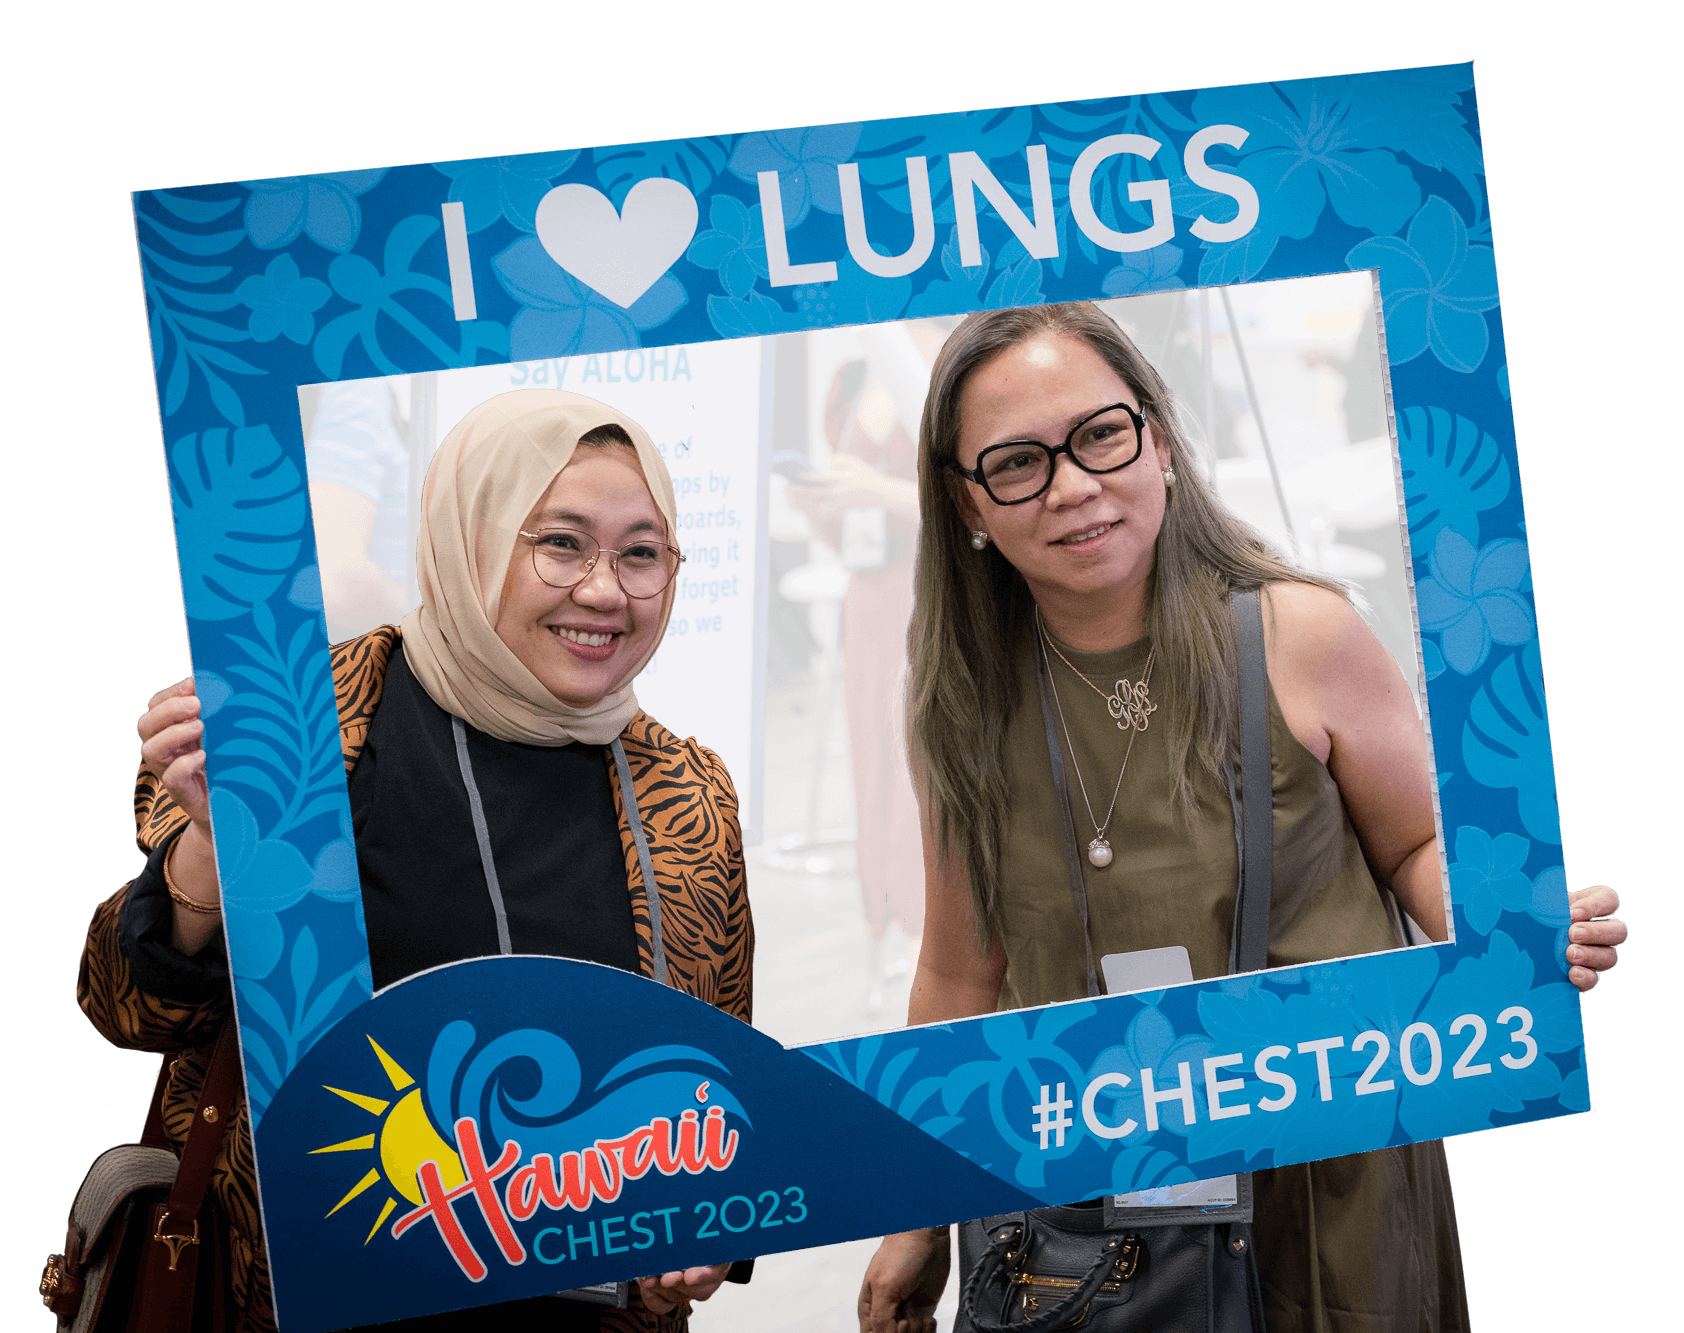 attendees at CHEST 2023 in Hawaiʻi